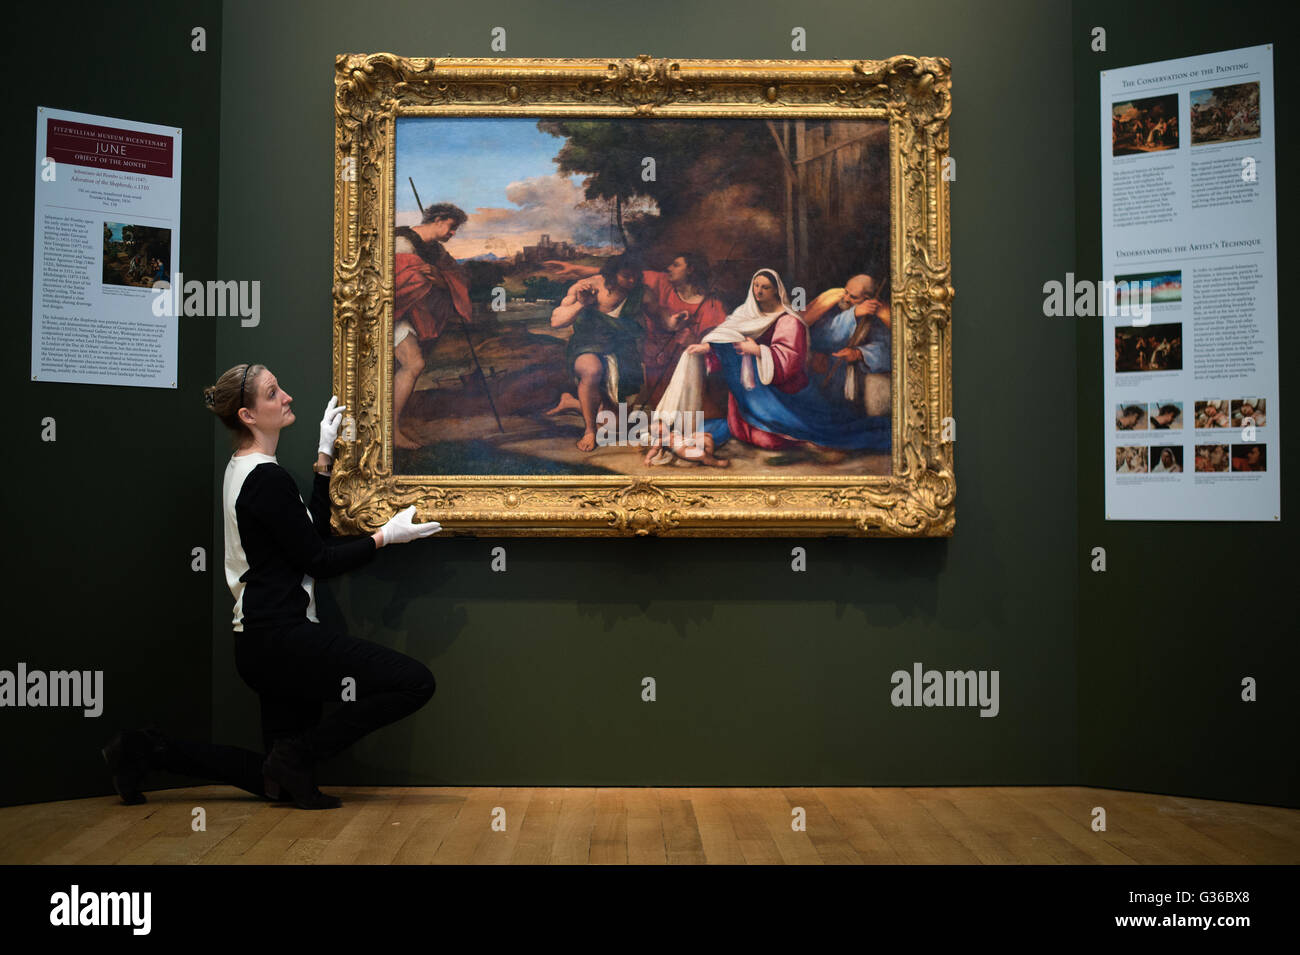 Employee Emma Shaw positions Sebastiano del Piombo's (1485Ã¢Â€Â“1547) Adoration of the Shepherds c. 1510, at the Fitzwilliam Museum in Cambridge after a a 10-year research and conservation project, the painting will go on show for the first time in 70 years. Stock Photo